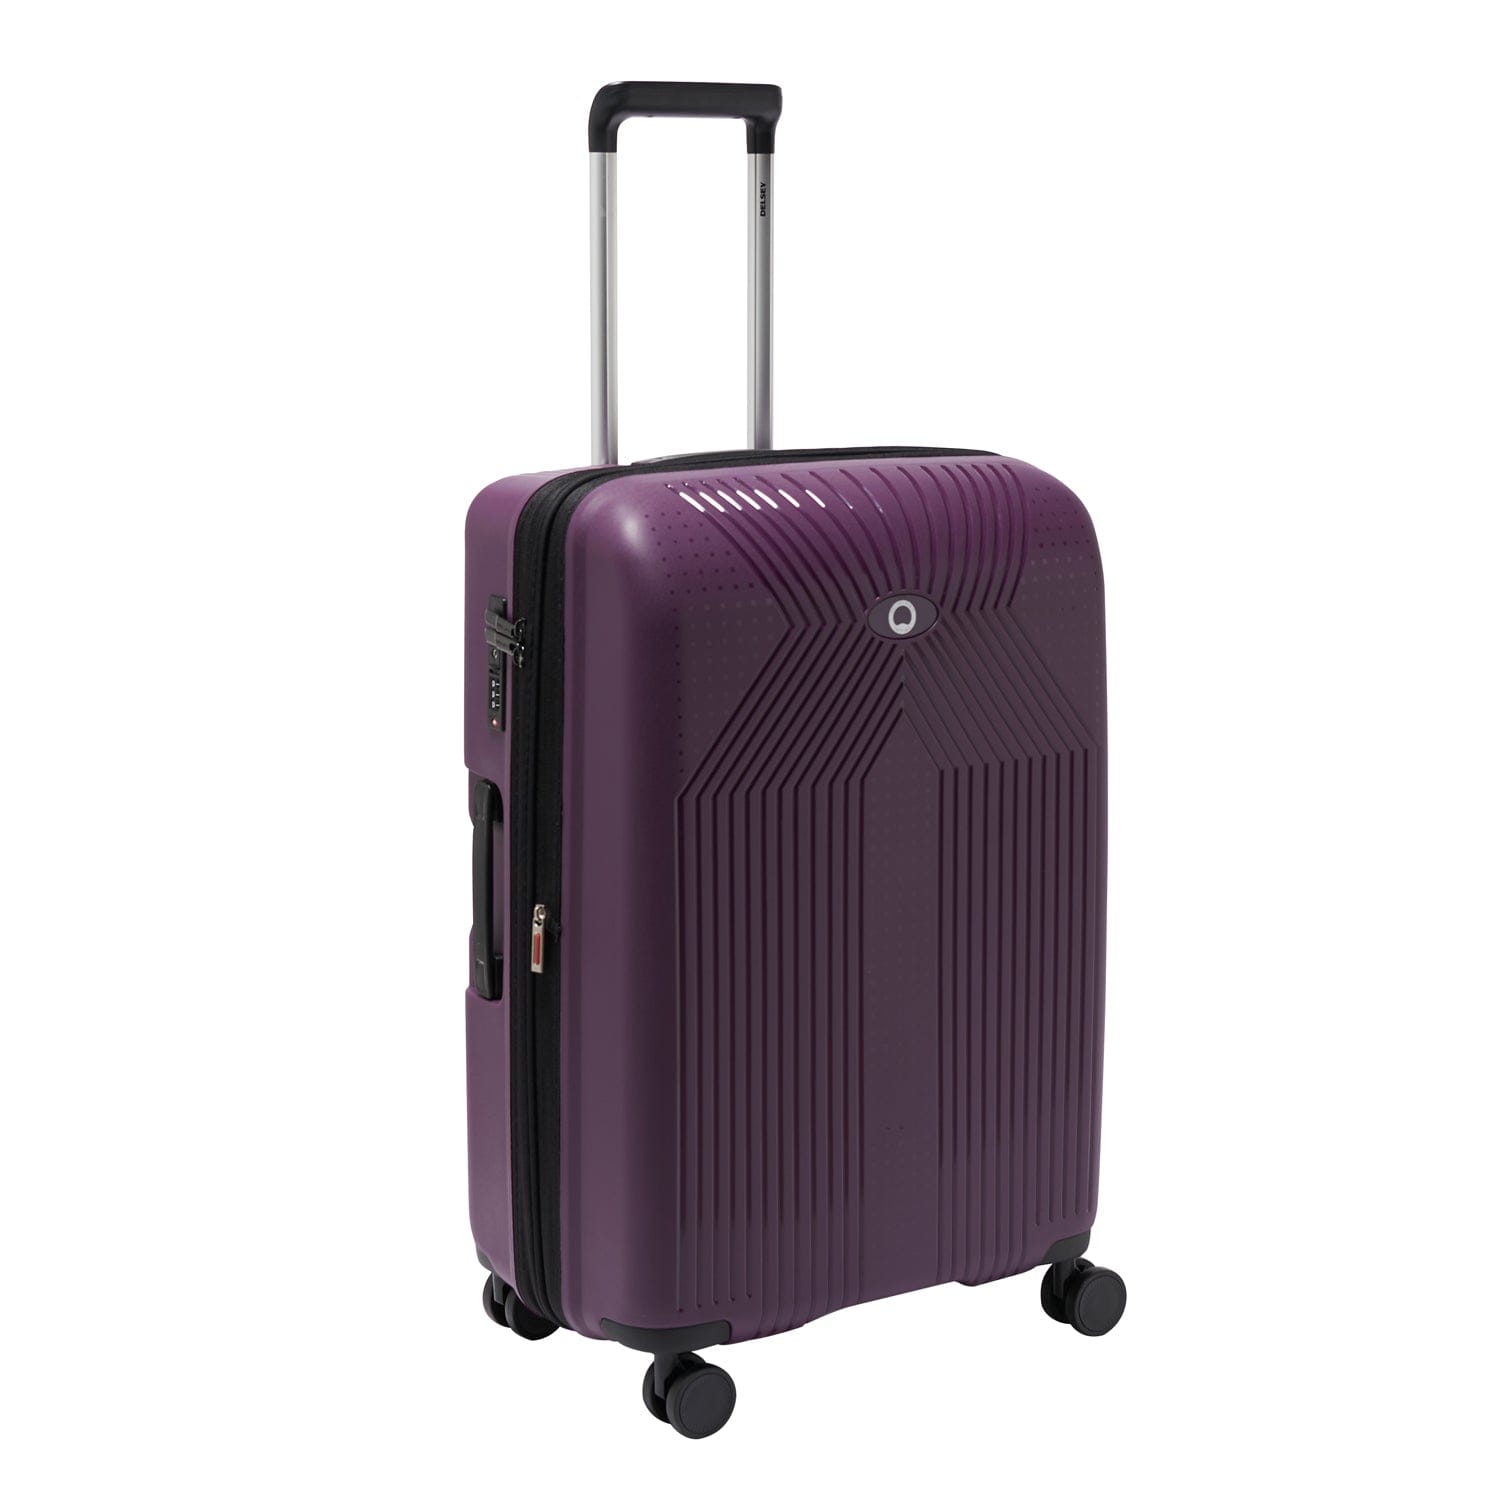 Delsey Ordener 2.0 66cm Hardcase 4 Double Wheel Expandable Check-In Luggage Trolley Purple - 00384681008E9